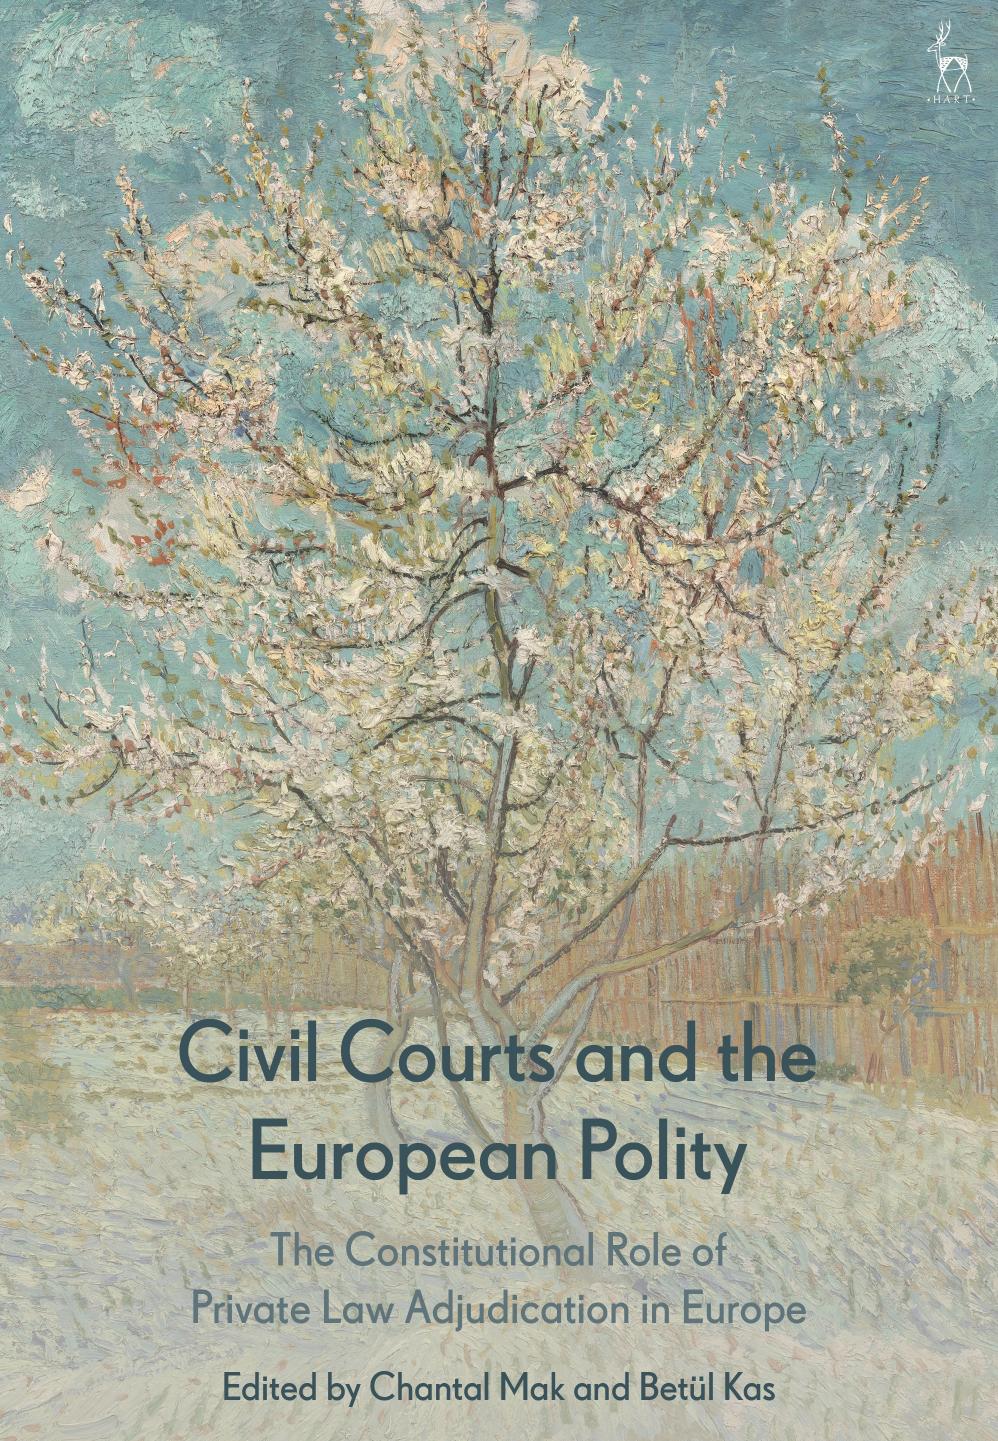 Civil Courts and the European Polity: The Constitutional Role of Private Law Adjudication in Europe by Chantal Mak Betül Kas